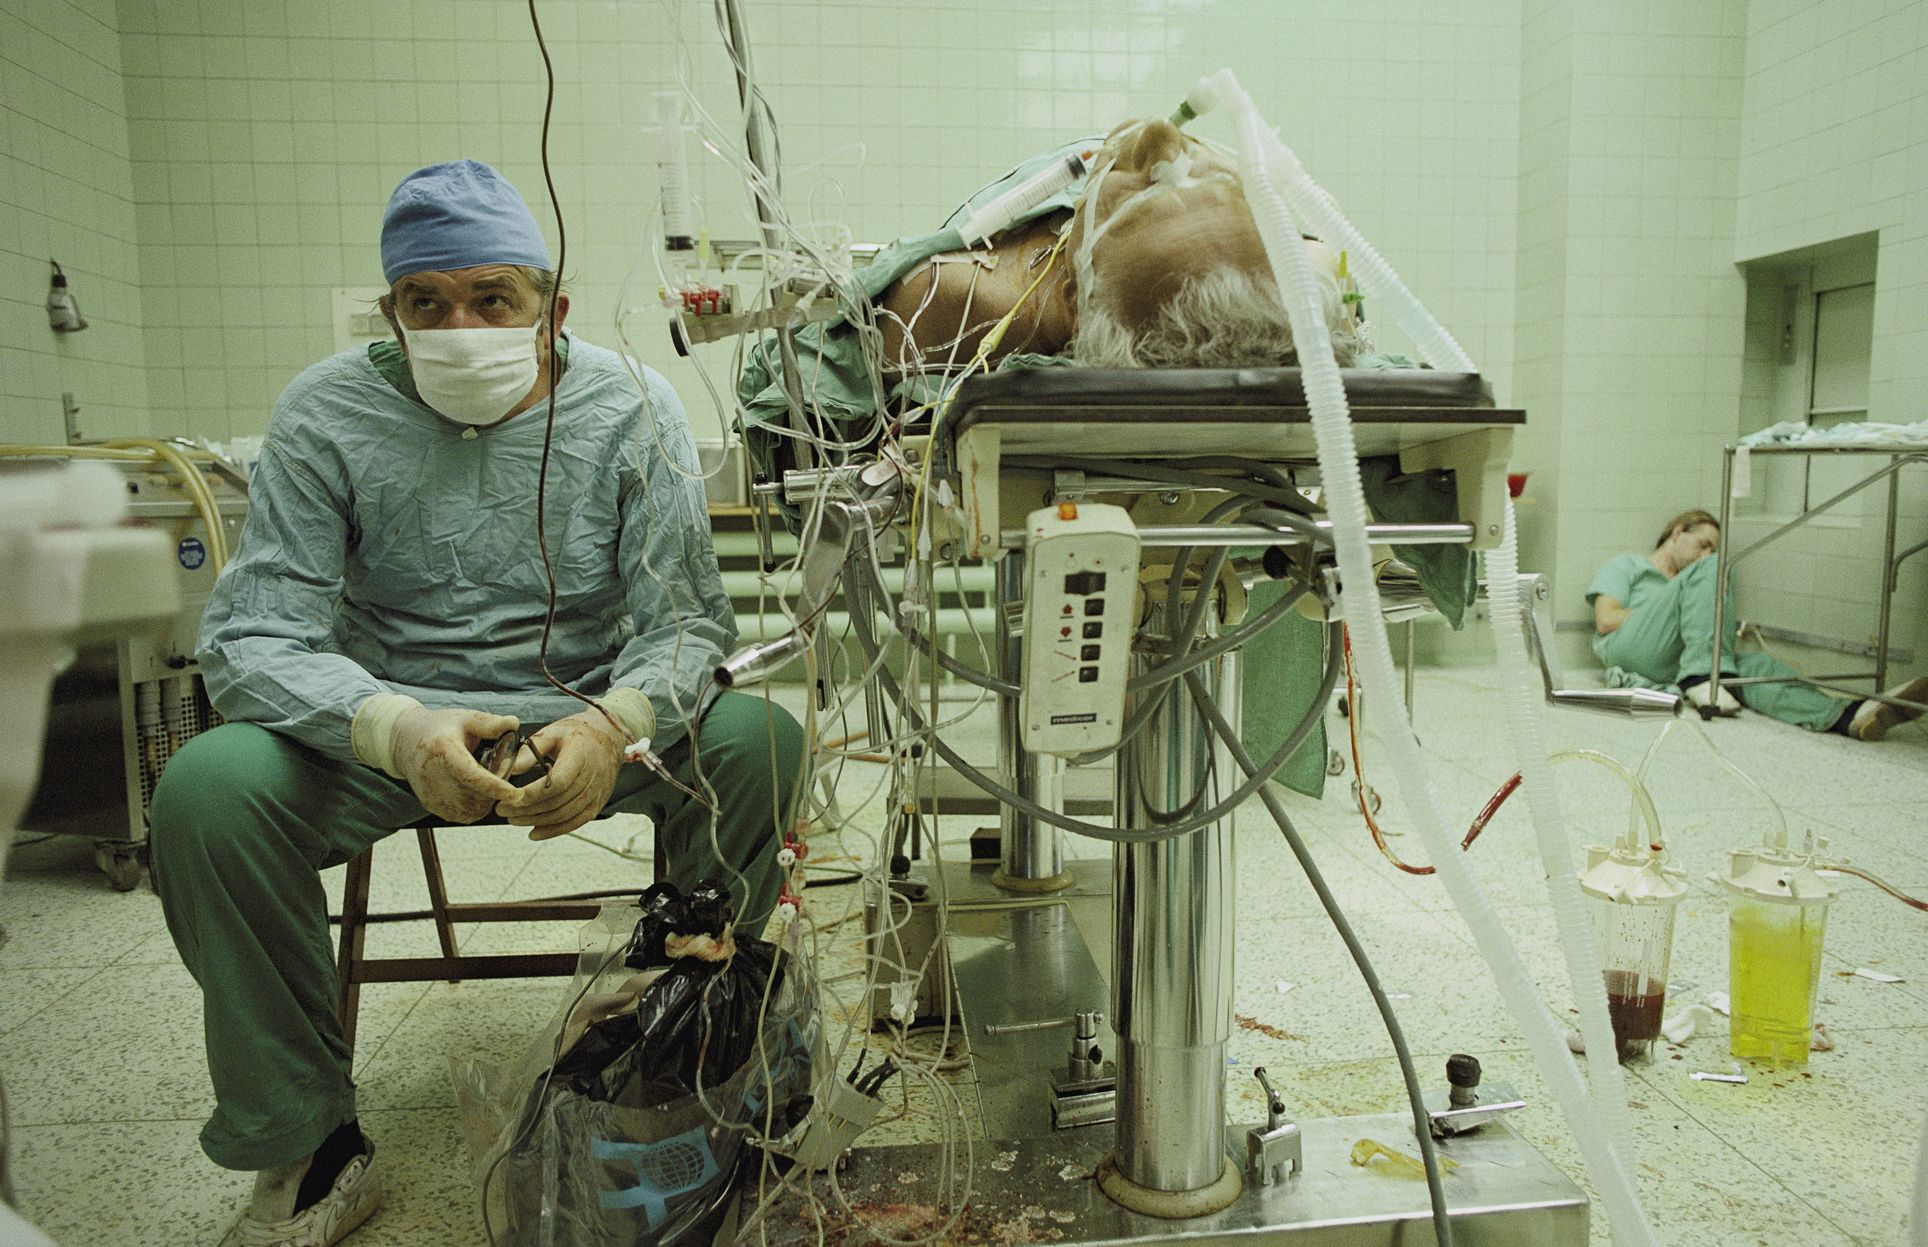 Surgeon monitors patients vitals after a 23-hour heart transplant, performed with outdated equipment in Poland, 1987. His assistant is asleep in the corner.